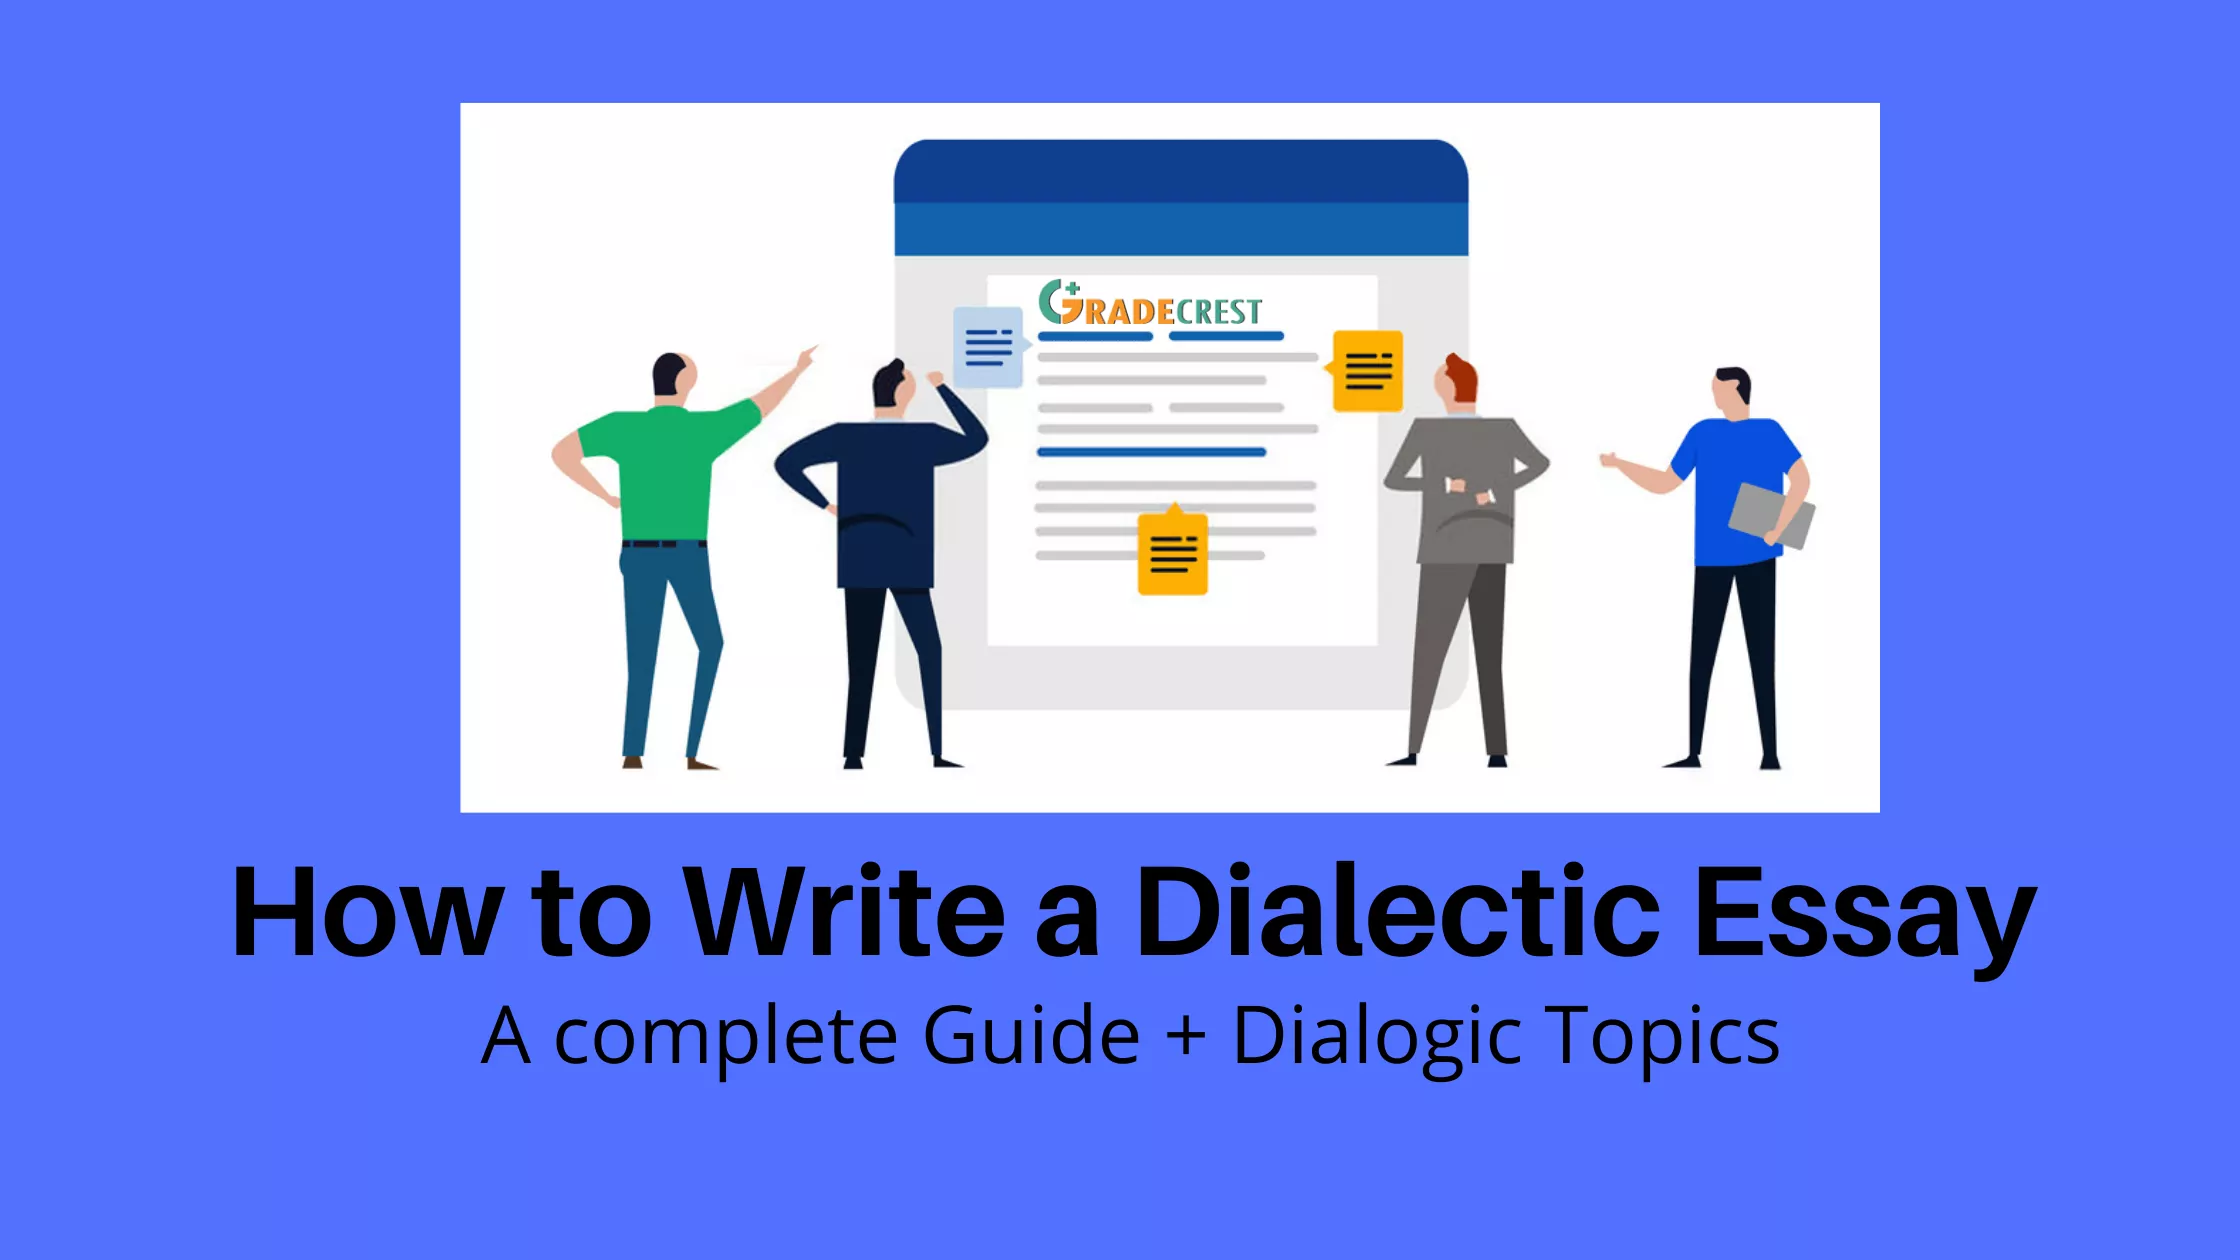 How to write a Dialectic essay